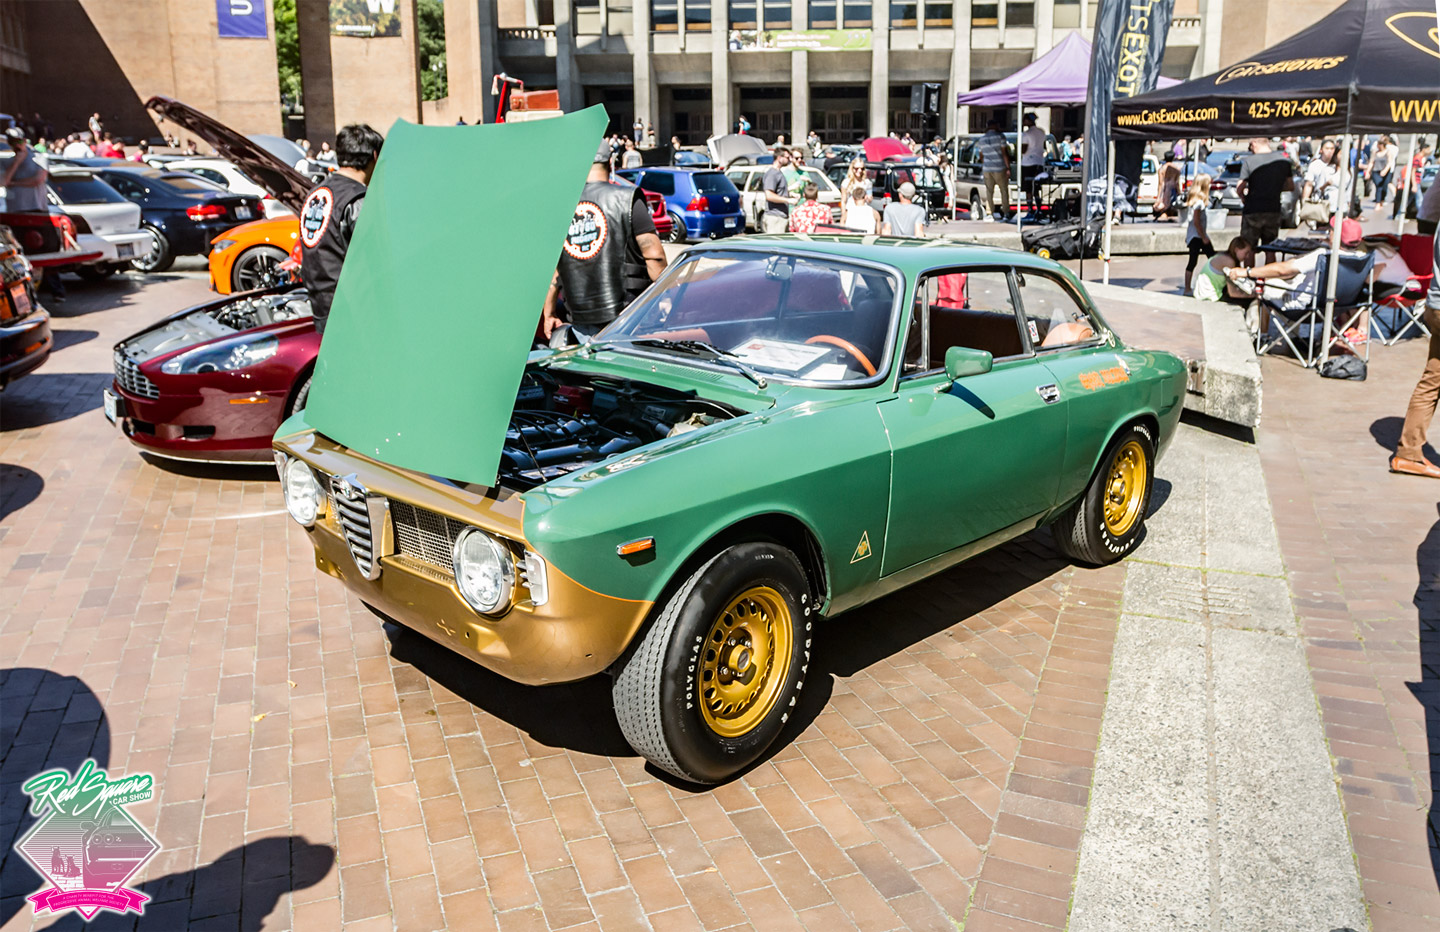 Red-Square-Car-Show-9-UW-Charity-Benefit-PAWS-org-Alfa-Romeo-GTV-s